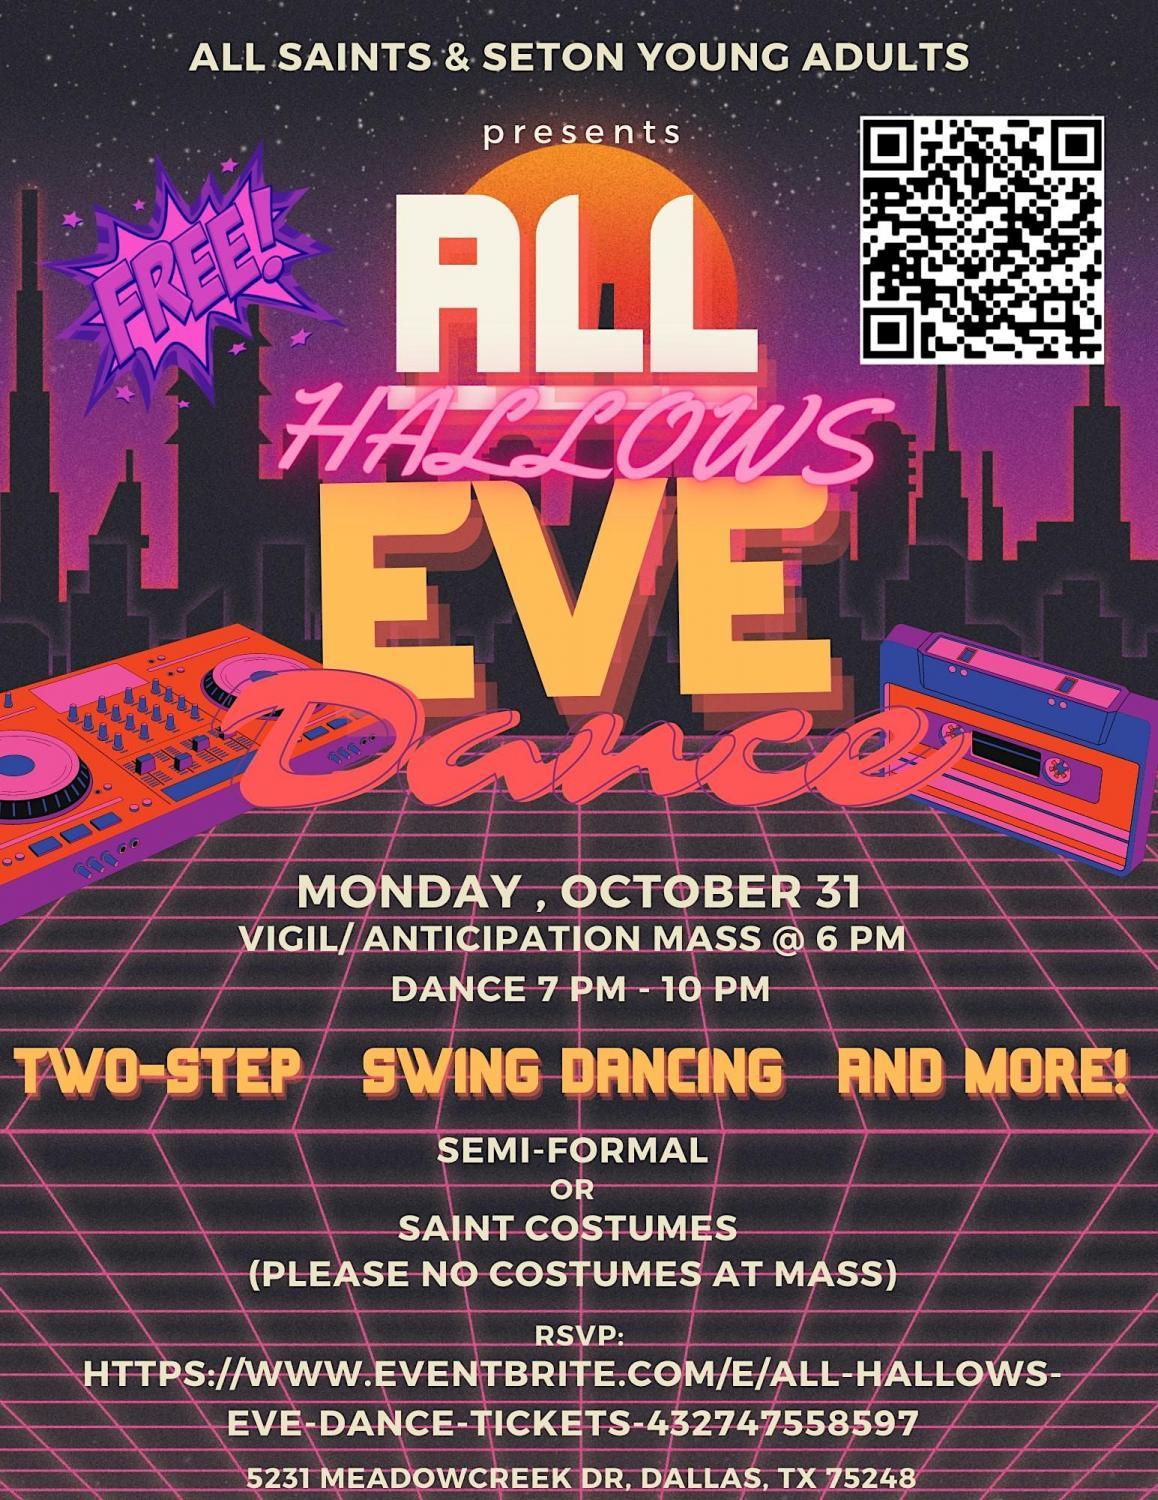 All Hallows Eve Dance
Mon Oct 31, 7:00 PM - Mon Oct 31, 10:00 PM
in 10 days